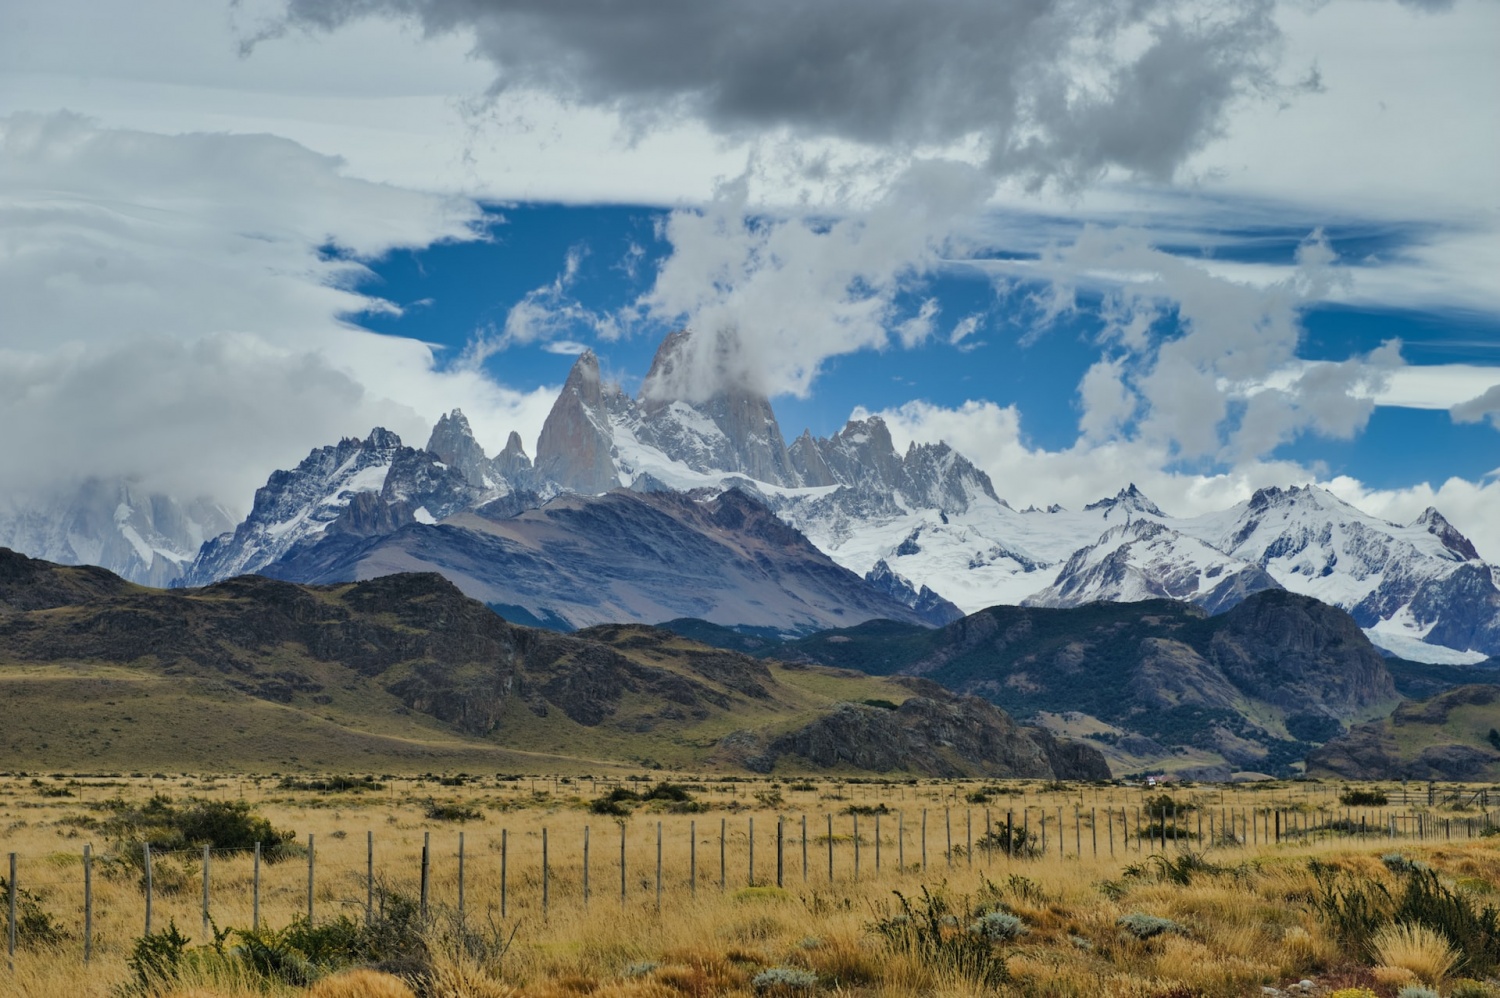 Rainy West Side of Andes Mountains Has Bigger Mice Compared to East Side, Study Says New Rule of Nature But Same DNA